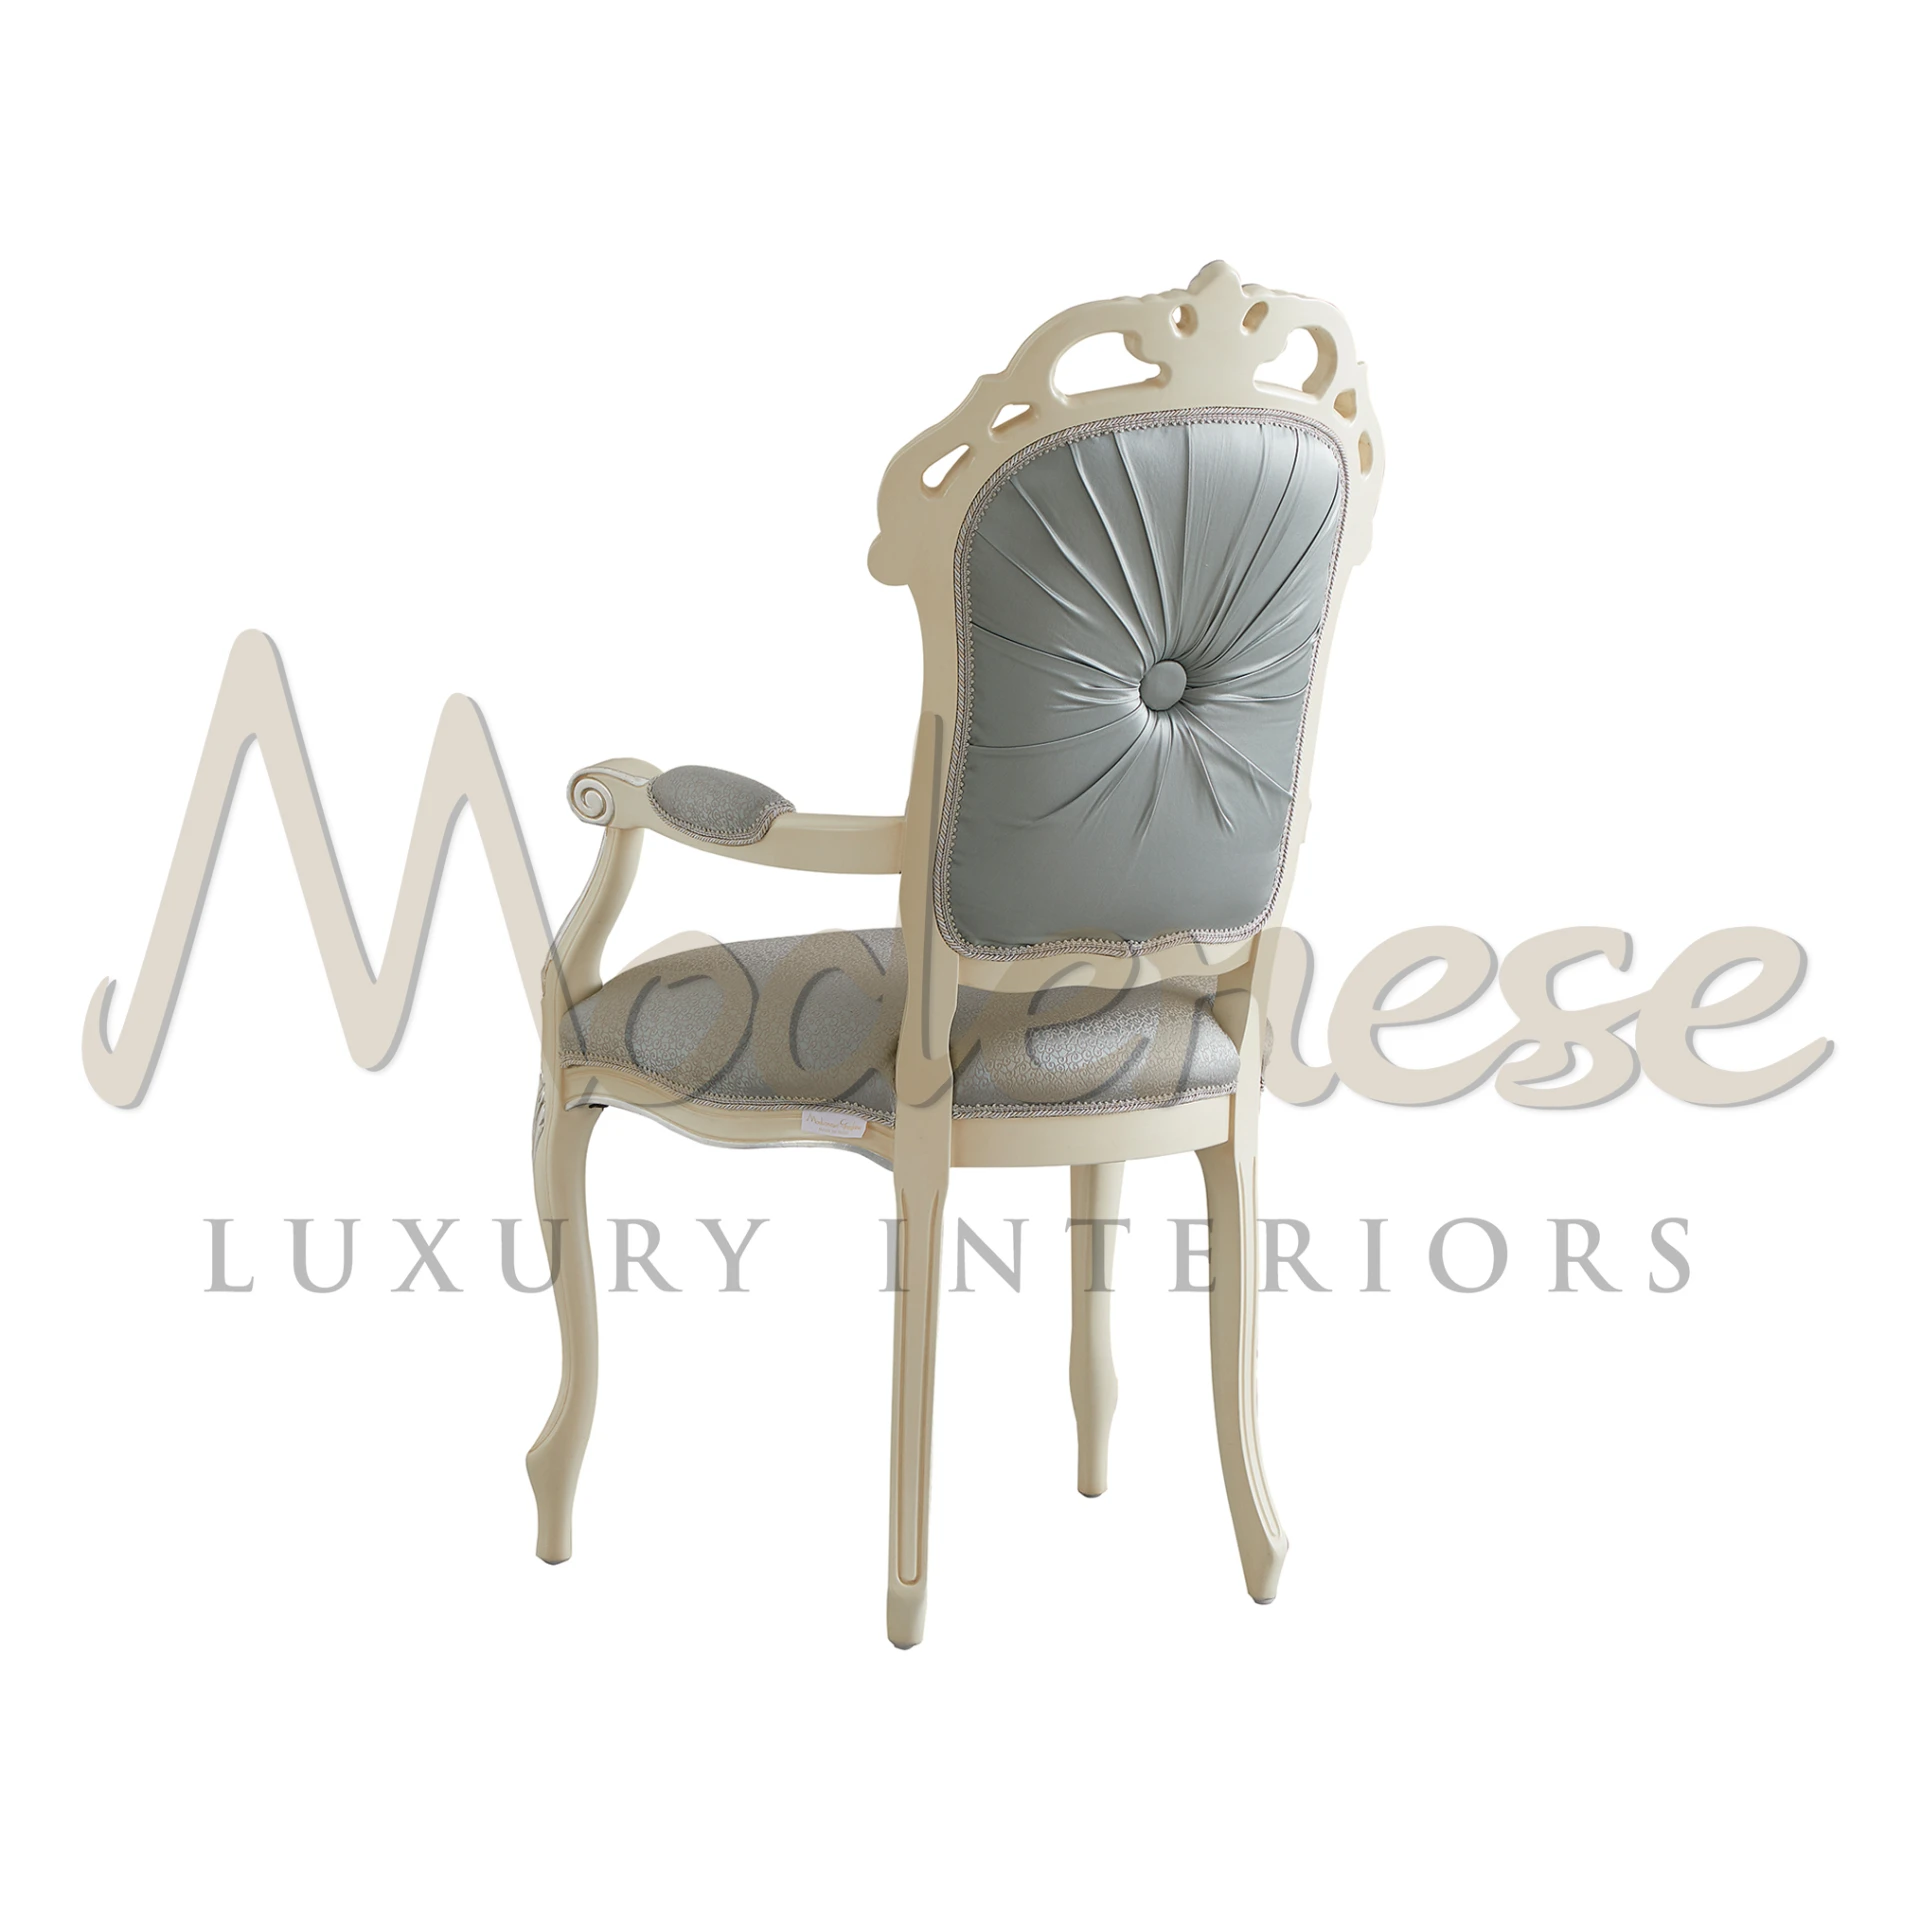 Luxurious Victorian-style chair with armrests for a royal touch.